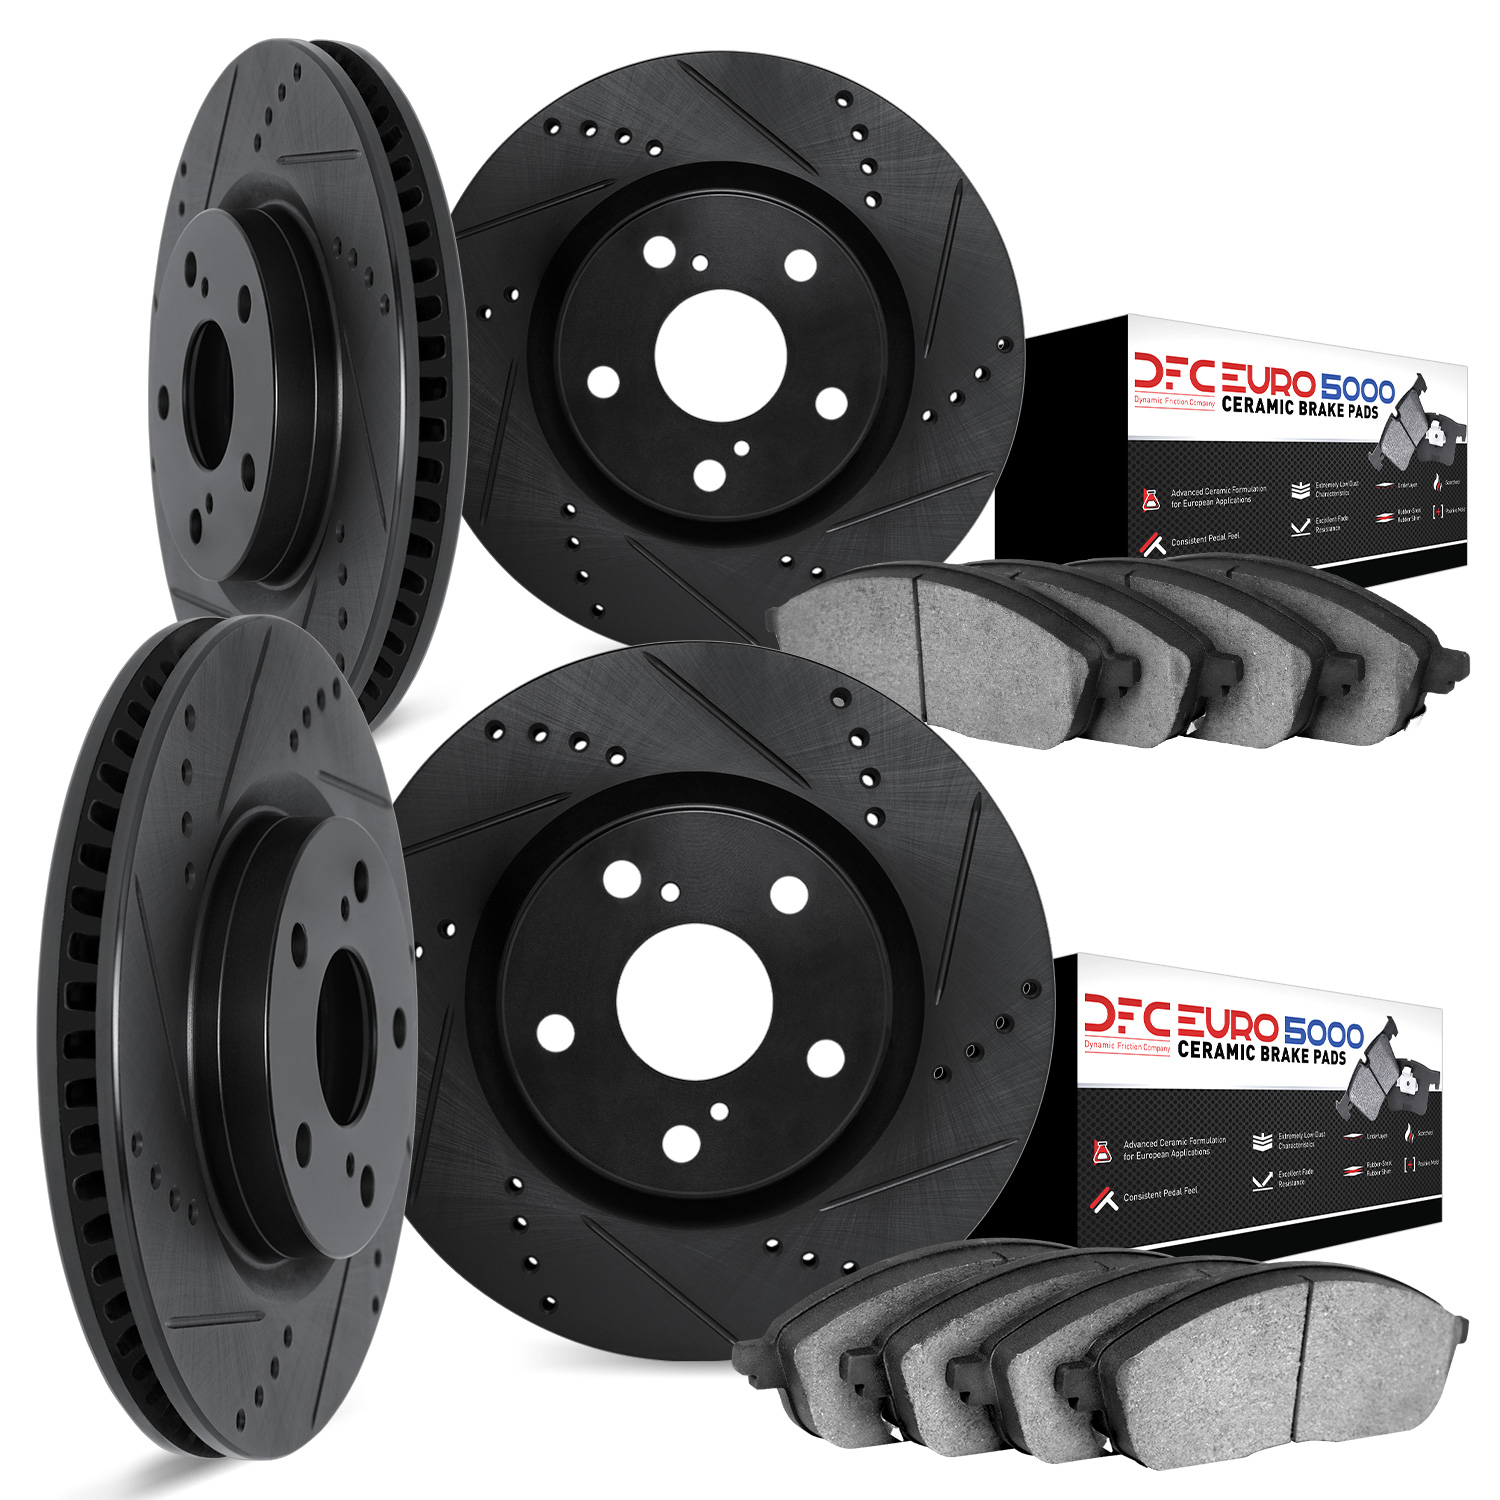 8604-27018 Drilled/Slotted Brake Rotors w/5000 Euro Ceramic Brake Pads Kit [Black], 2016-2016 Volvo, Position: Front and Rear